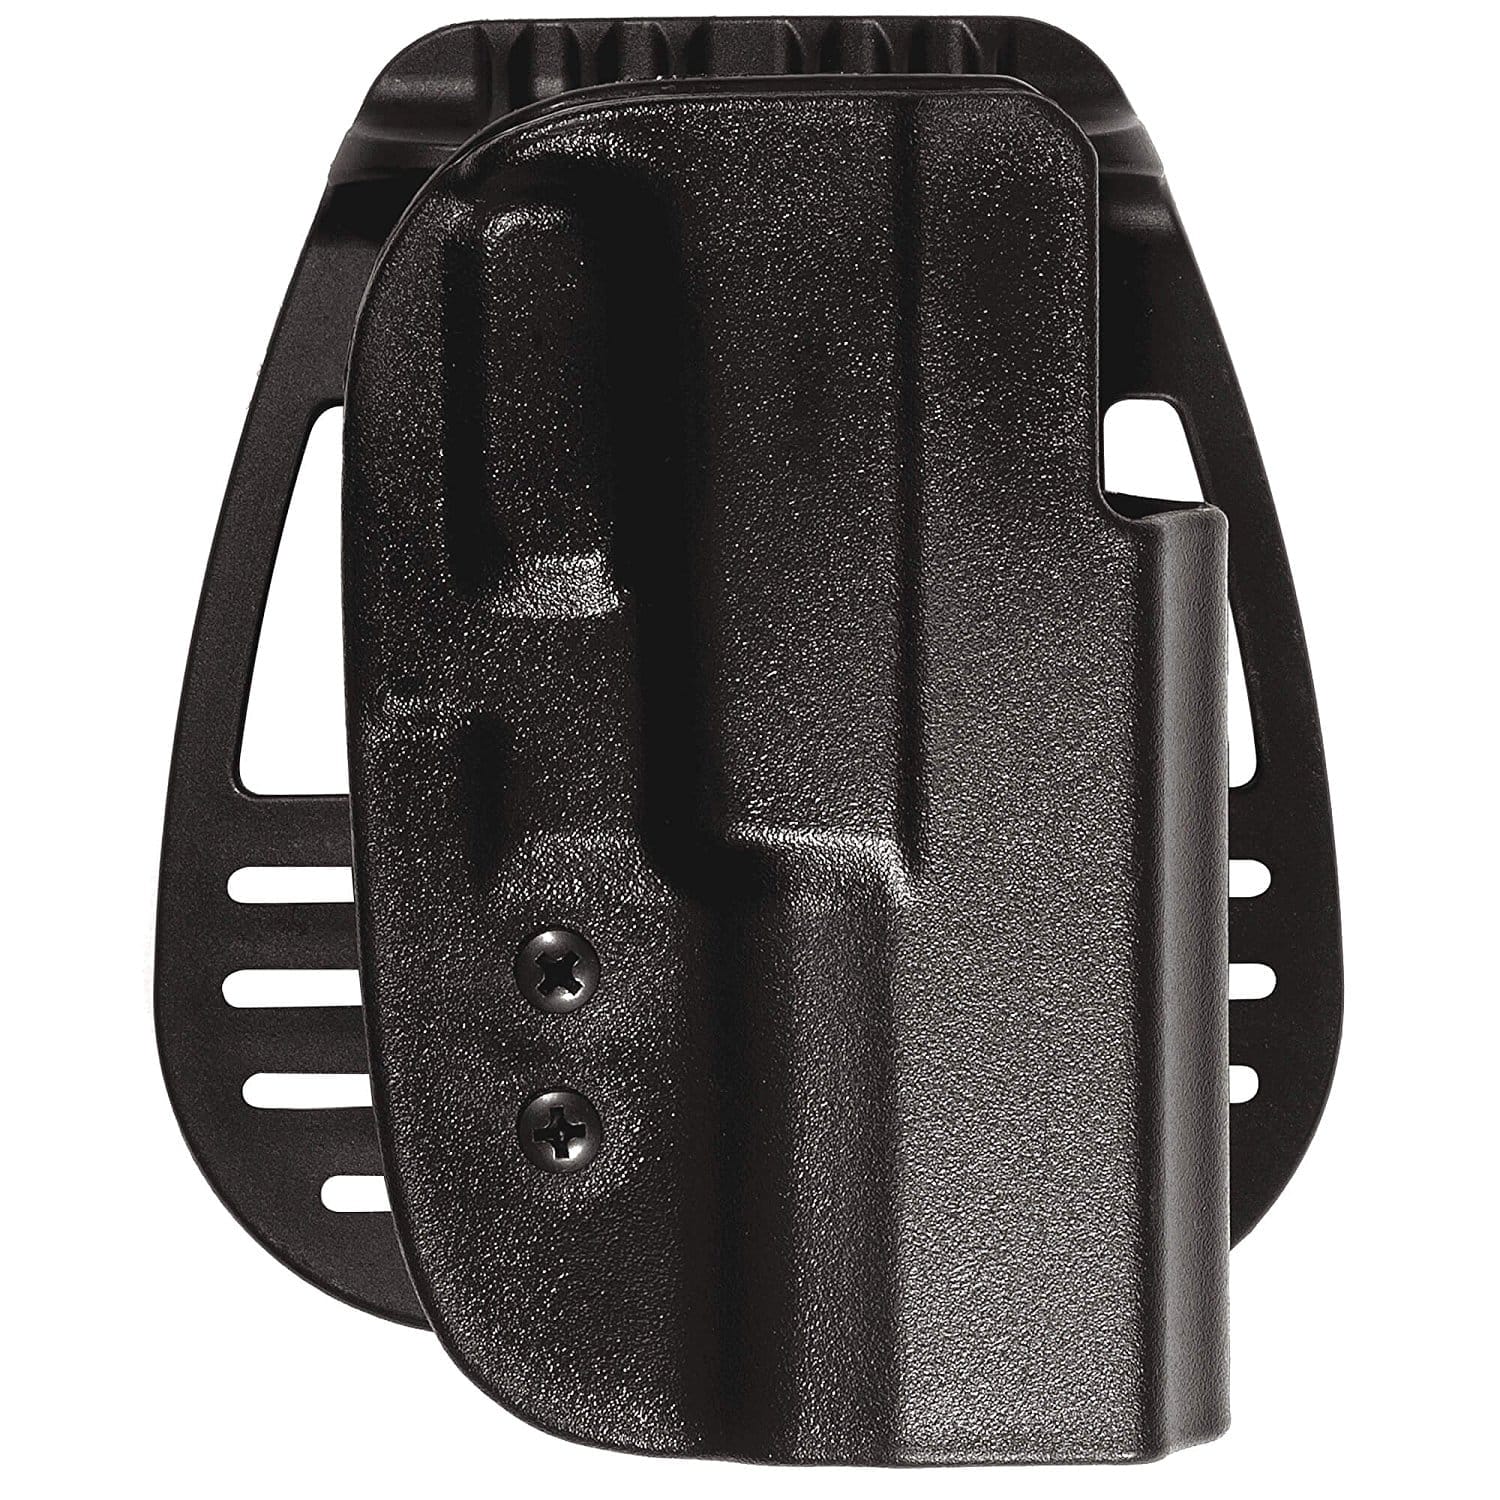  Kydex Open Top Hip Holster by Uncle Mike